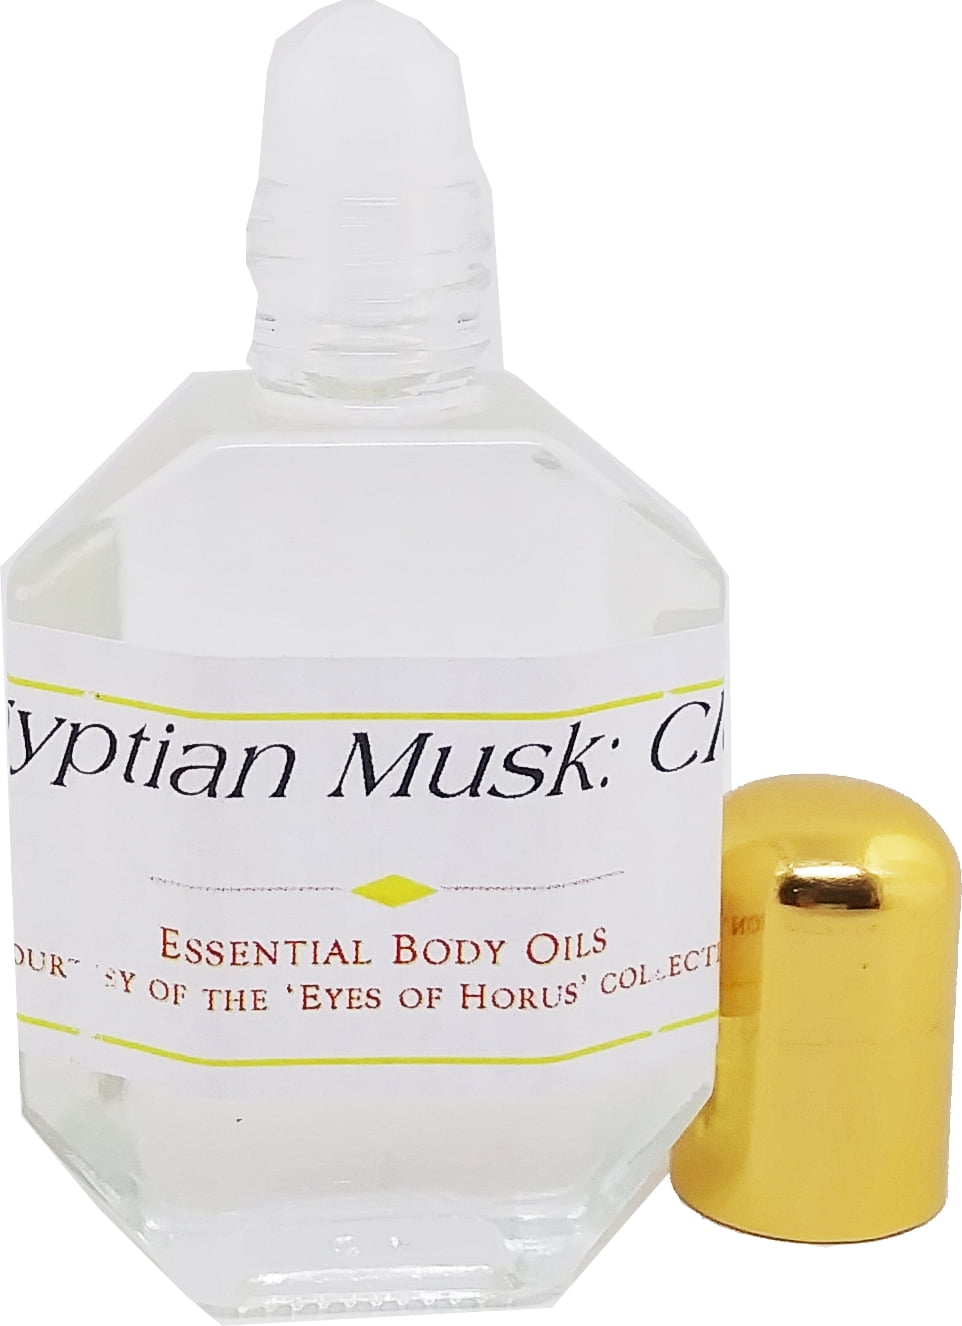 Egyptian Musk 100% Natural Pure Body Perfume Oil Roll-on Unisex Fragrance